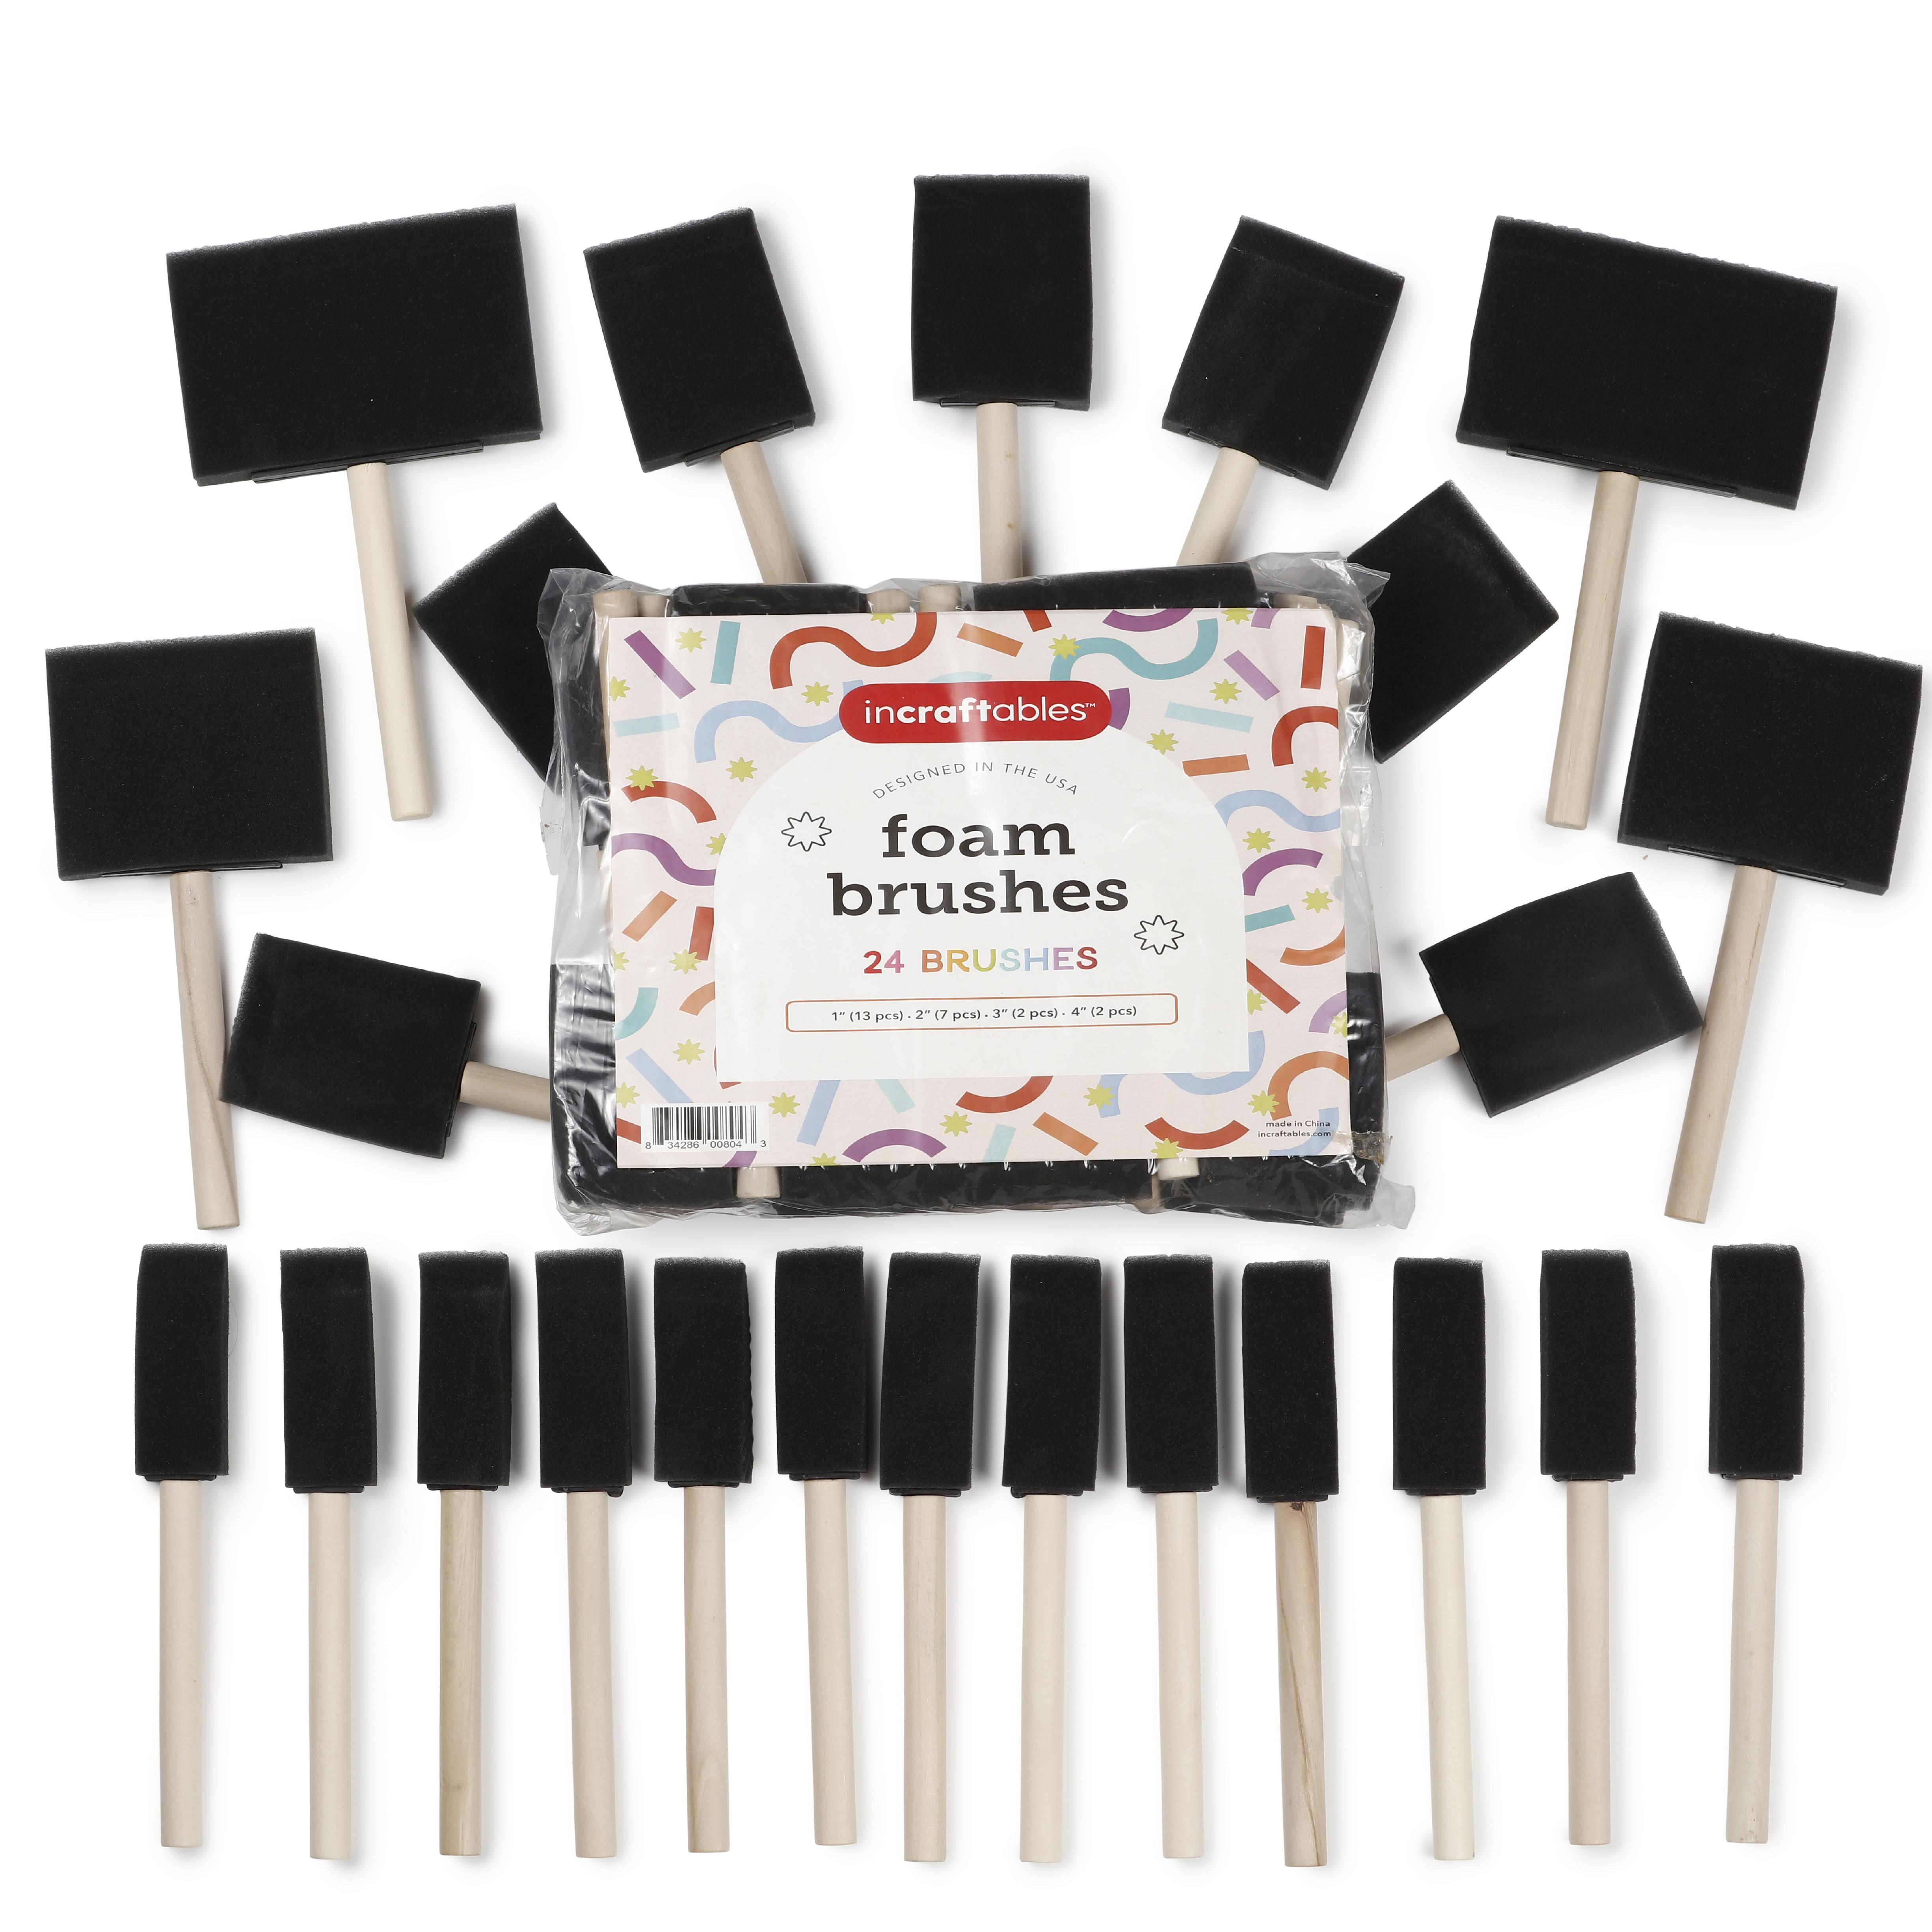 Incraftables Sponge Brushes for Painting 24pcs. Foam Brushes for Staining,  DIY Crafts, Acrylic Paints, Arts, Polyurethane & Mod Podge. Best Assorted  Sponge Paint Brushes (1”, 2”, 3” & 4 Inch)